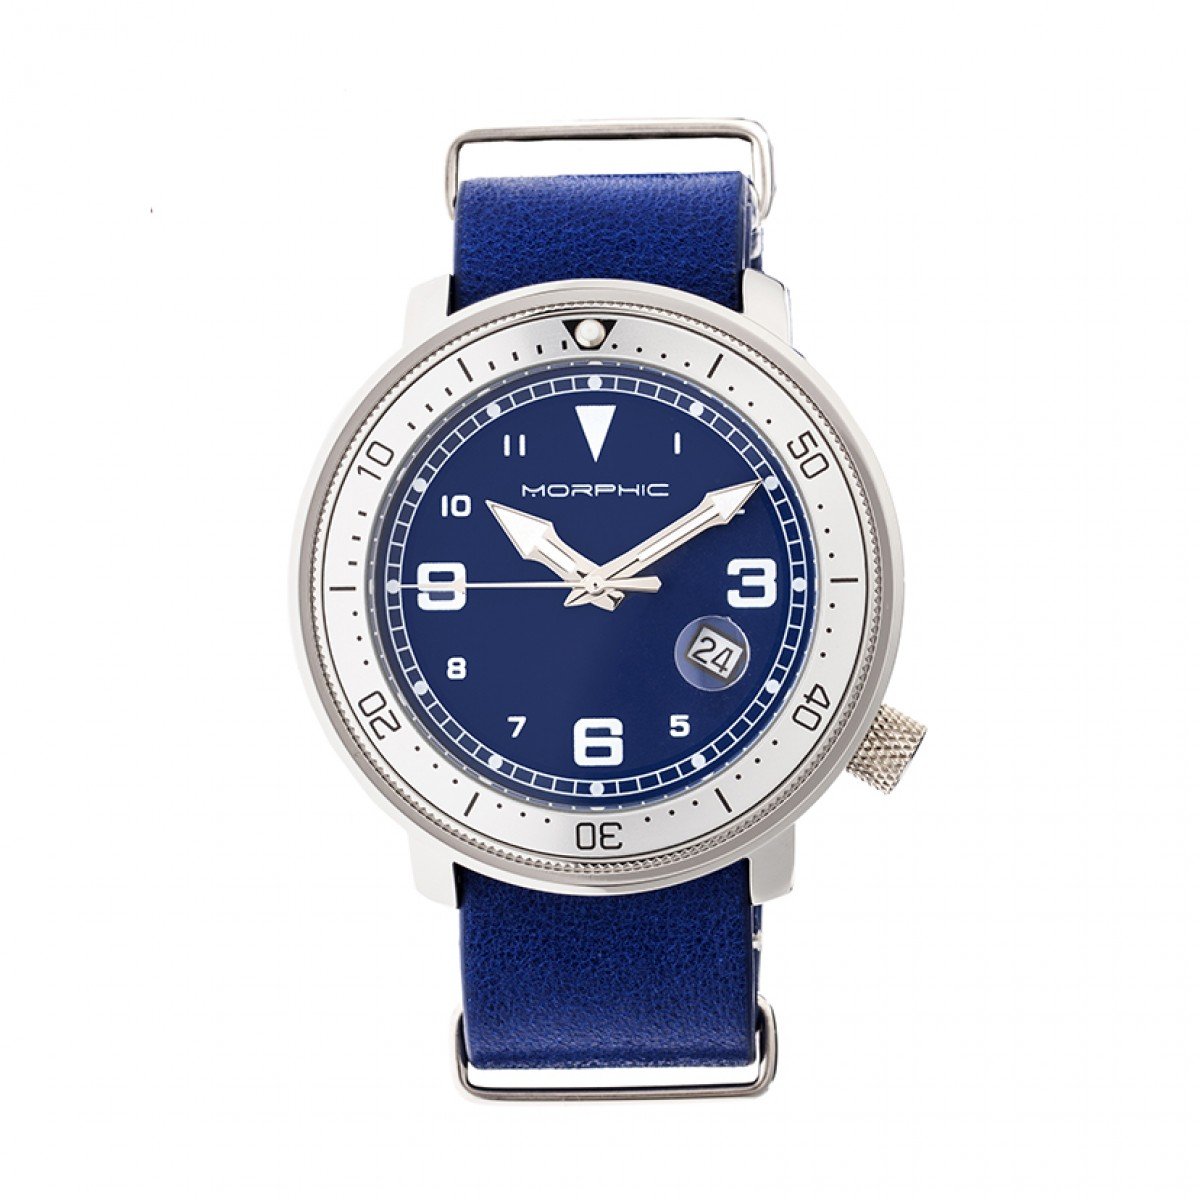 Morphic M58 Series Nato Leather-Band Watch w/ Date - Silver/Blue - MPH5802